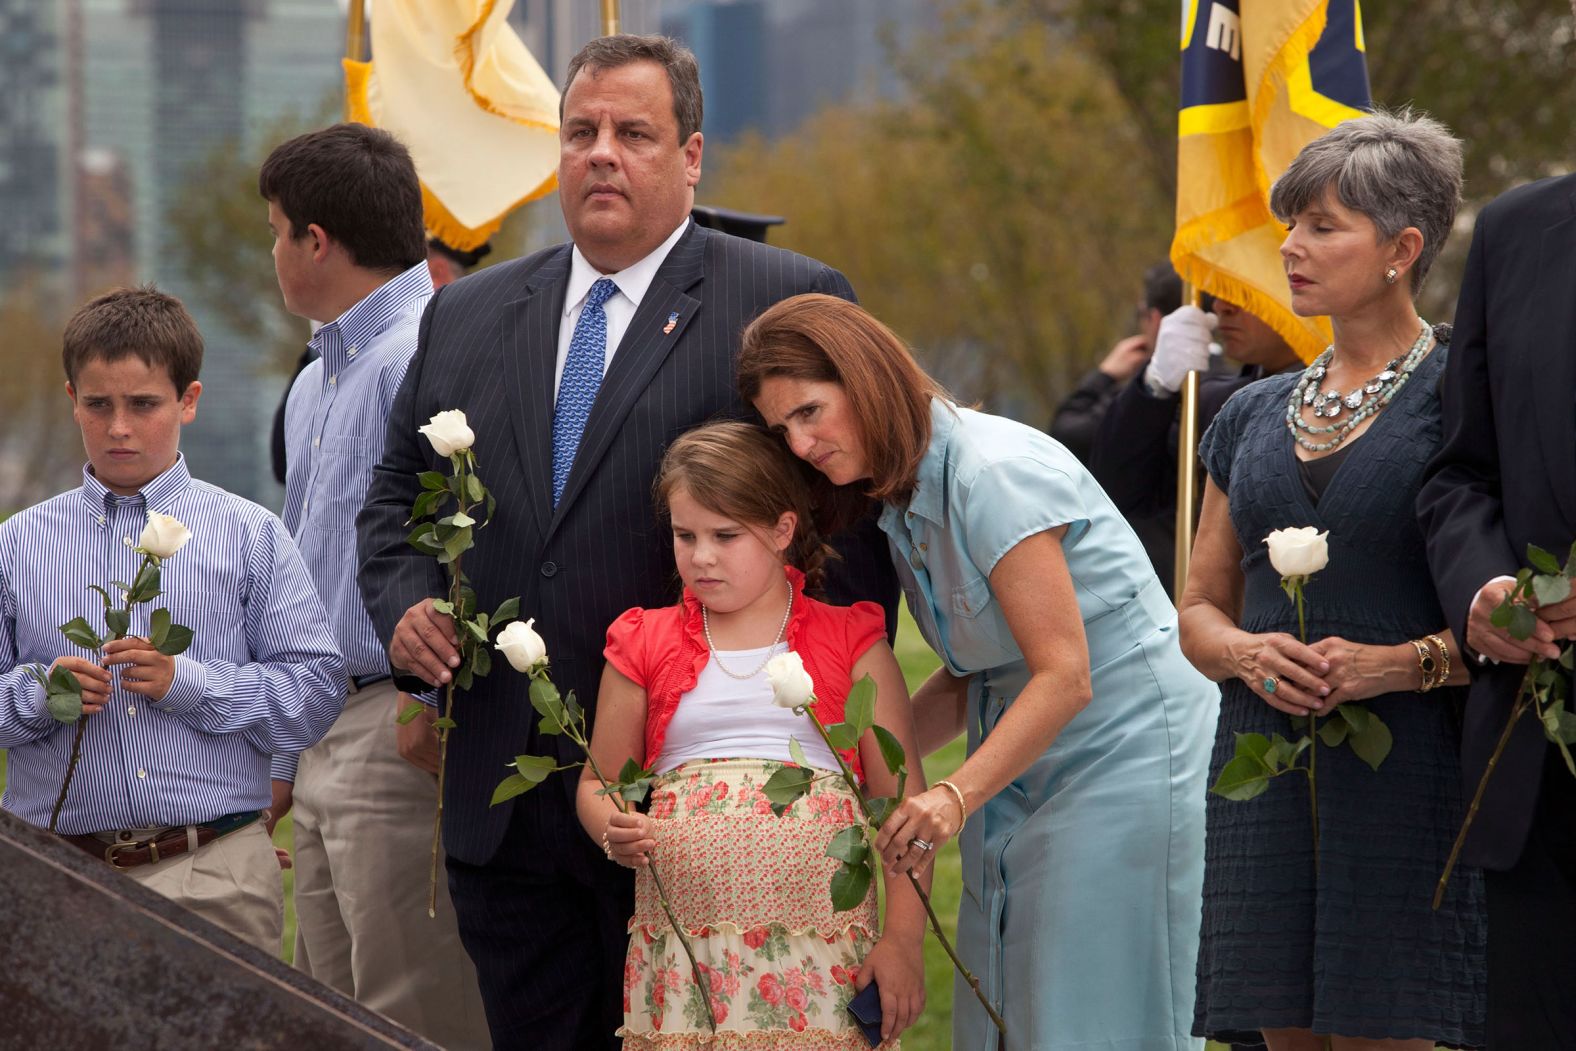 Christie is flanked by his wife and their children as they attend the dedication of Empty Sky, a 9/11 memorial in Jersey City, New Jersey, in 2011.